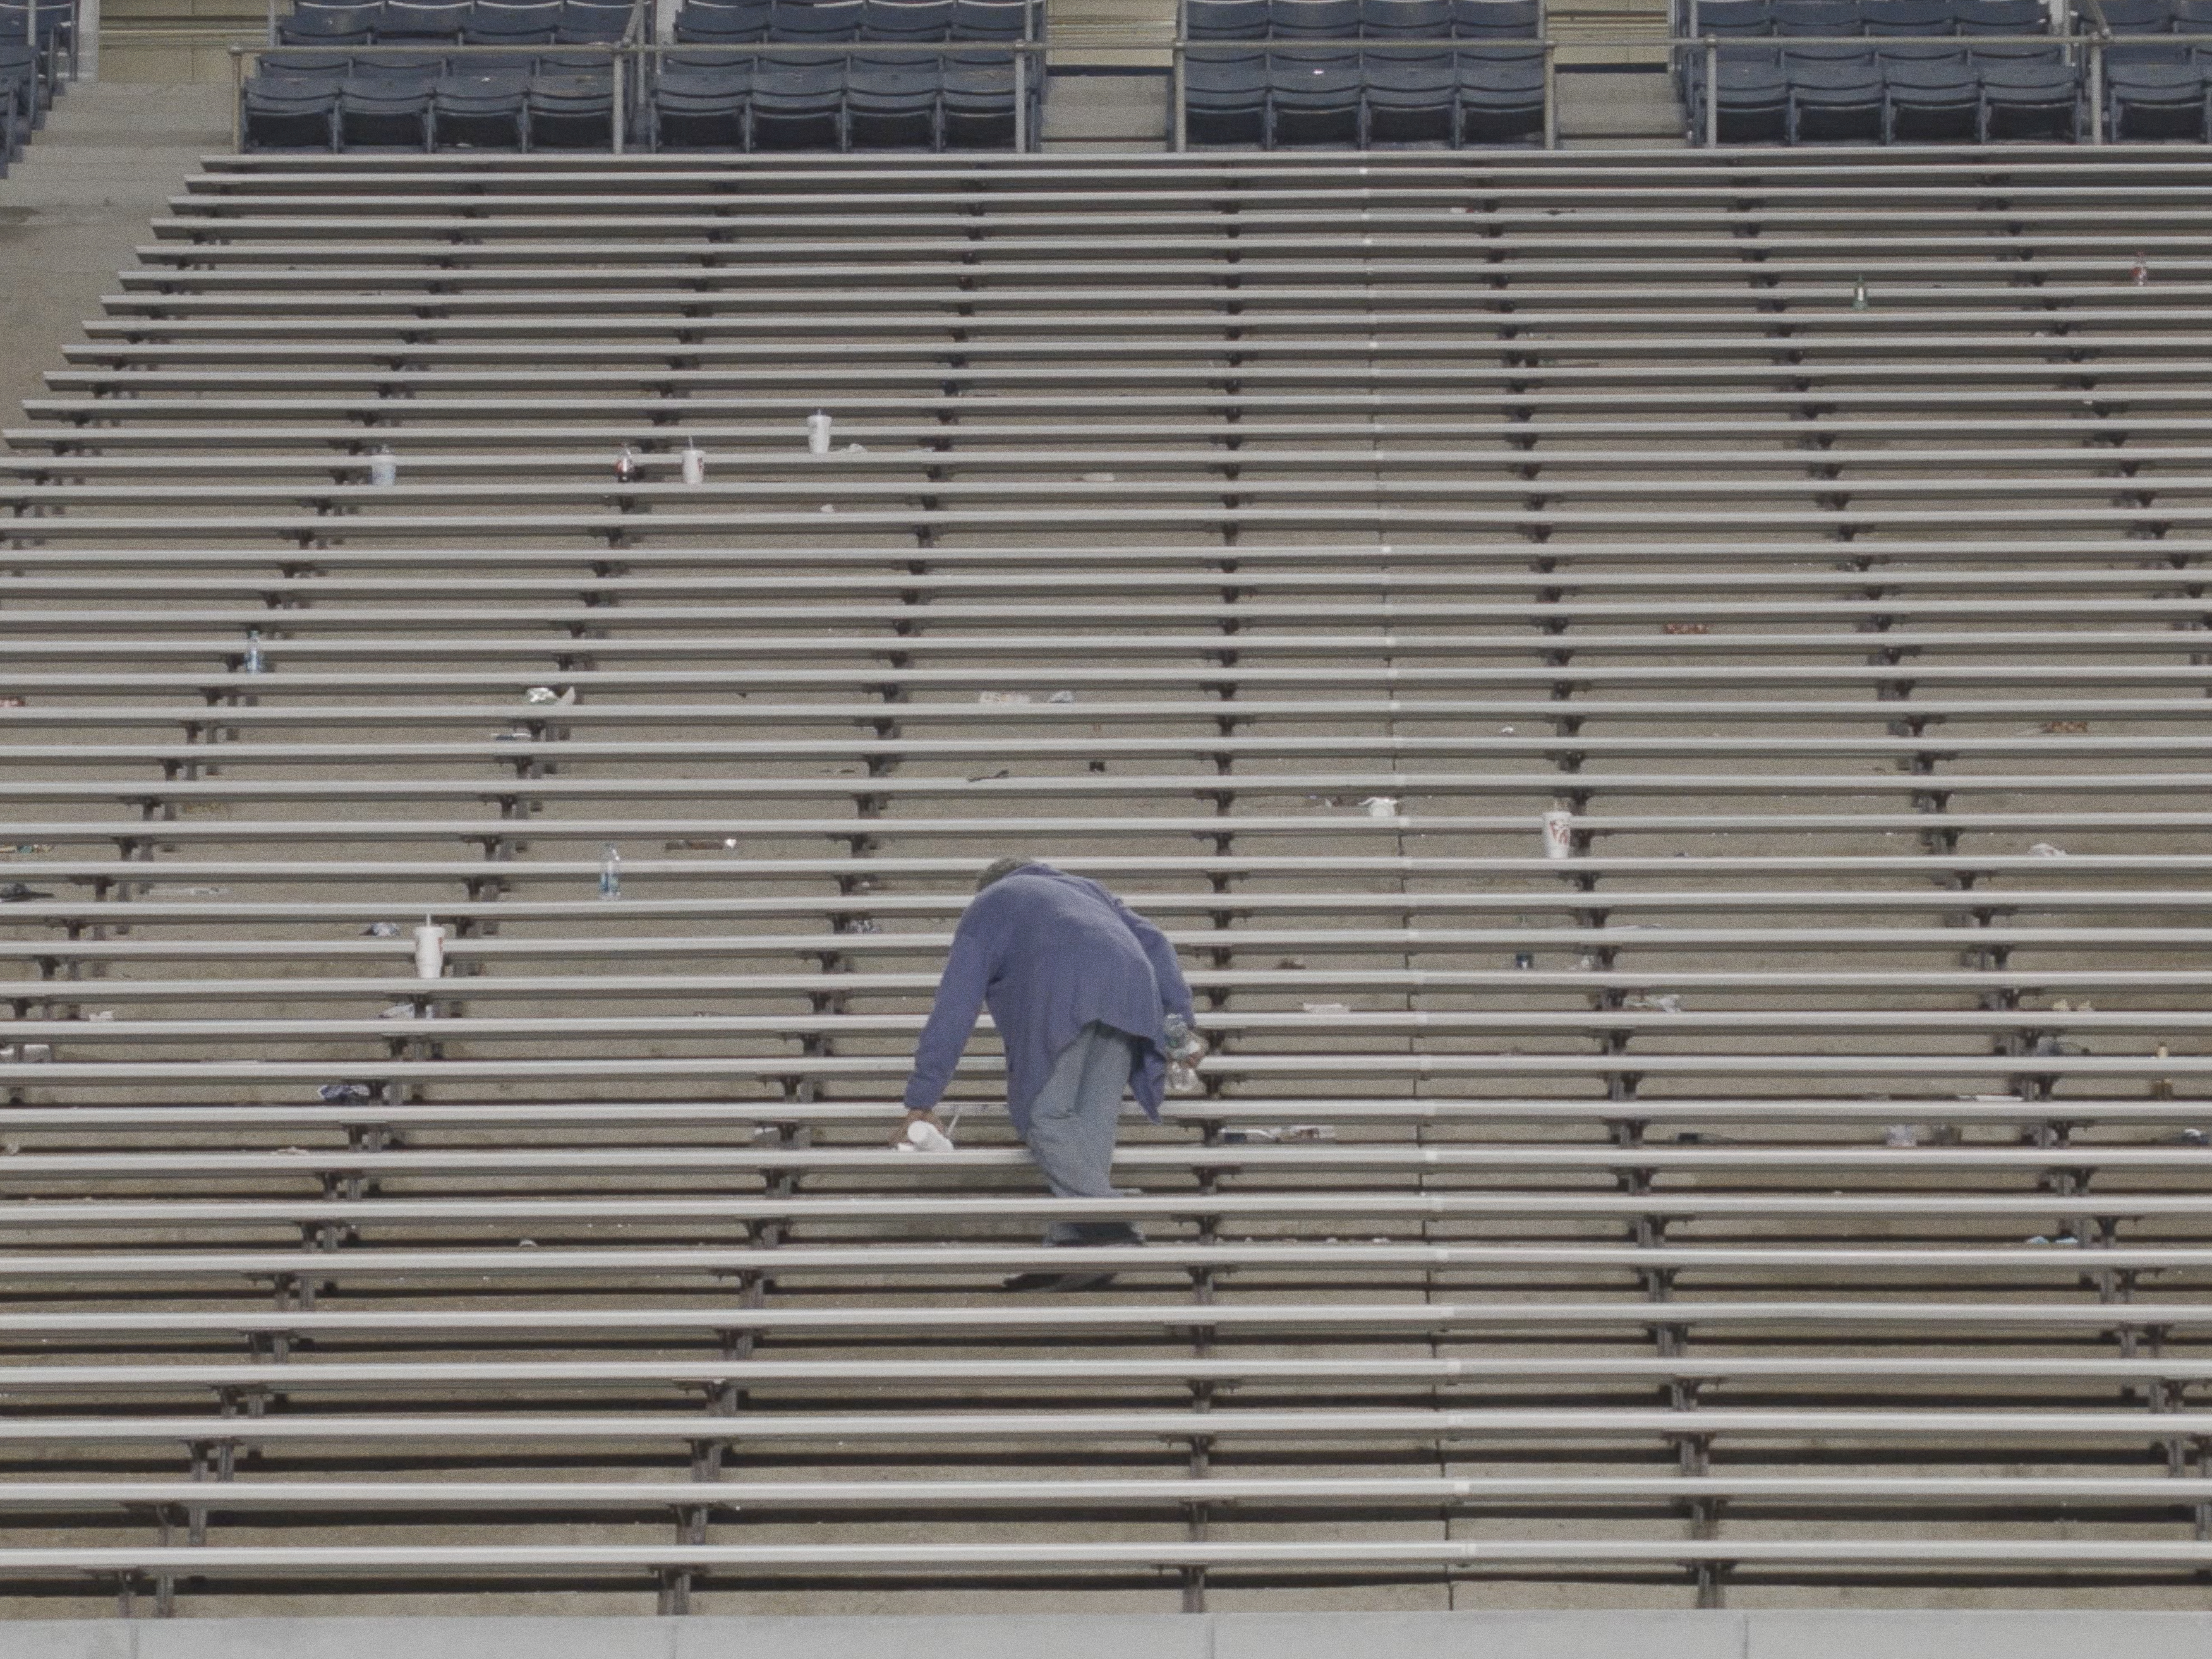 Still of a person cleaning stadium seating.